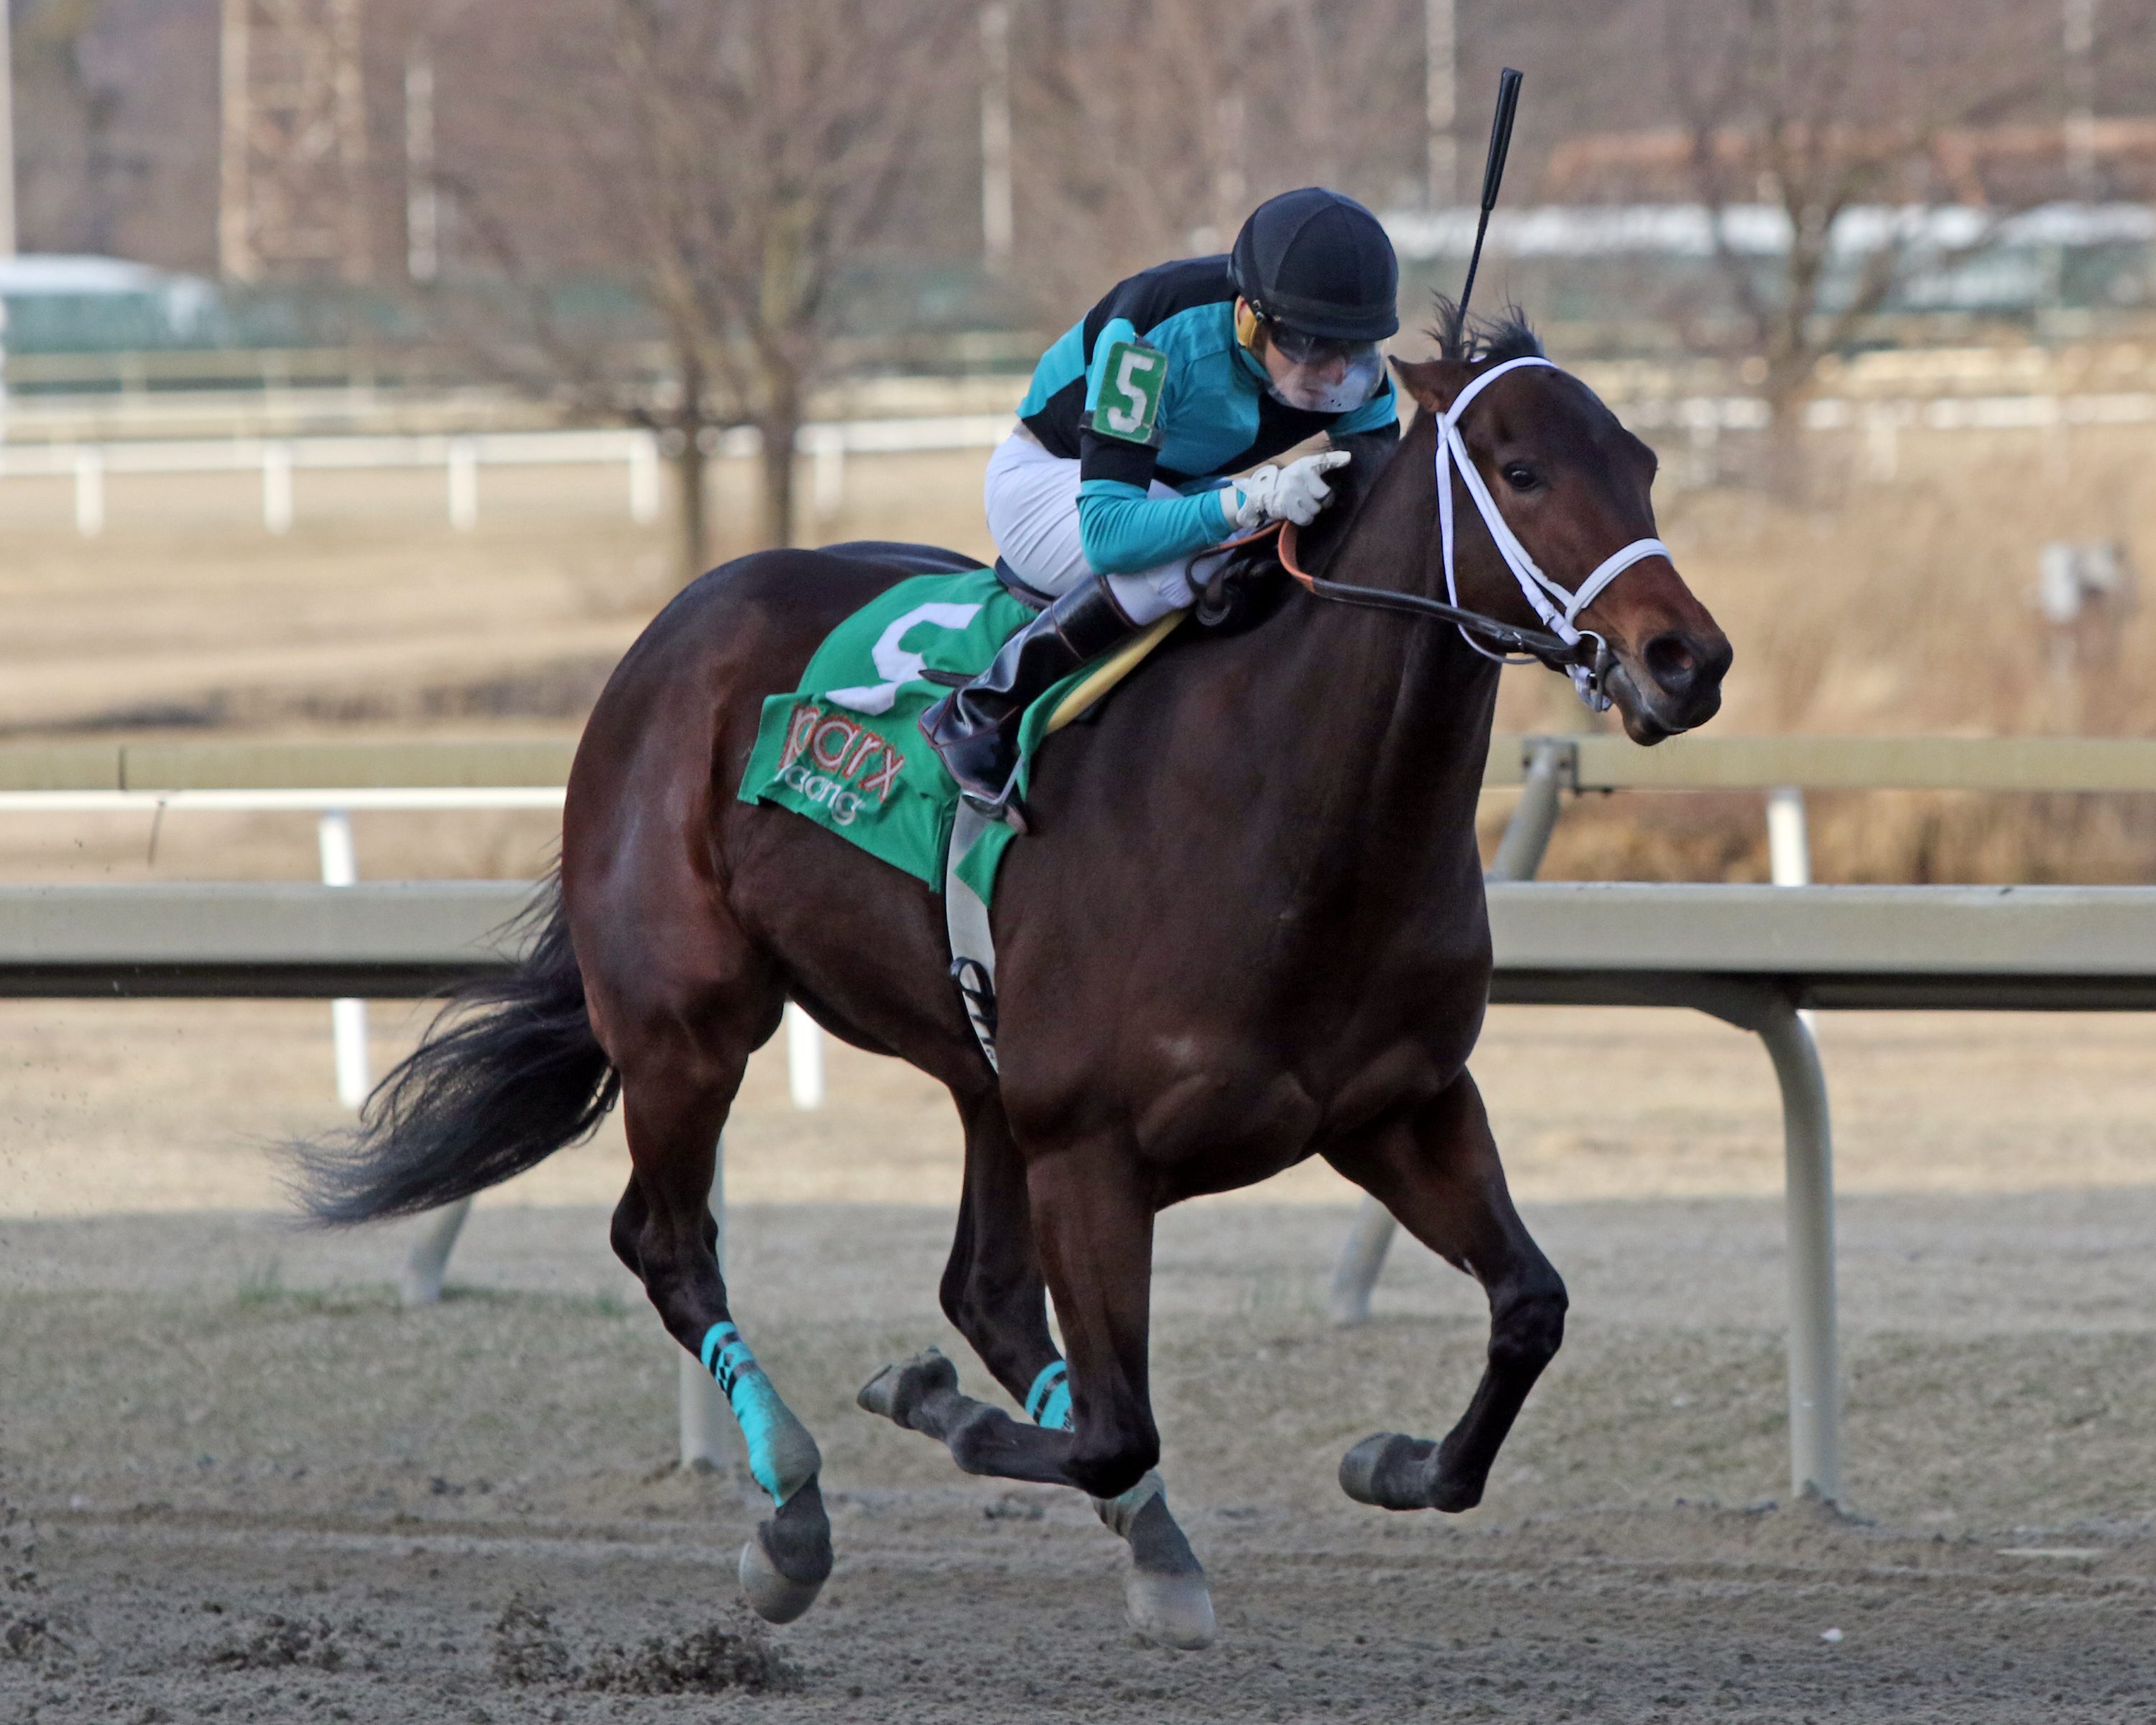 Scaramouche with Silvestre Gonzalez win The Rittenhouse Square at Parx on March 8, 2022. Photo By: Chad B. Harmon